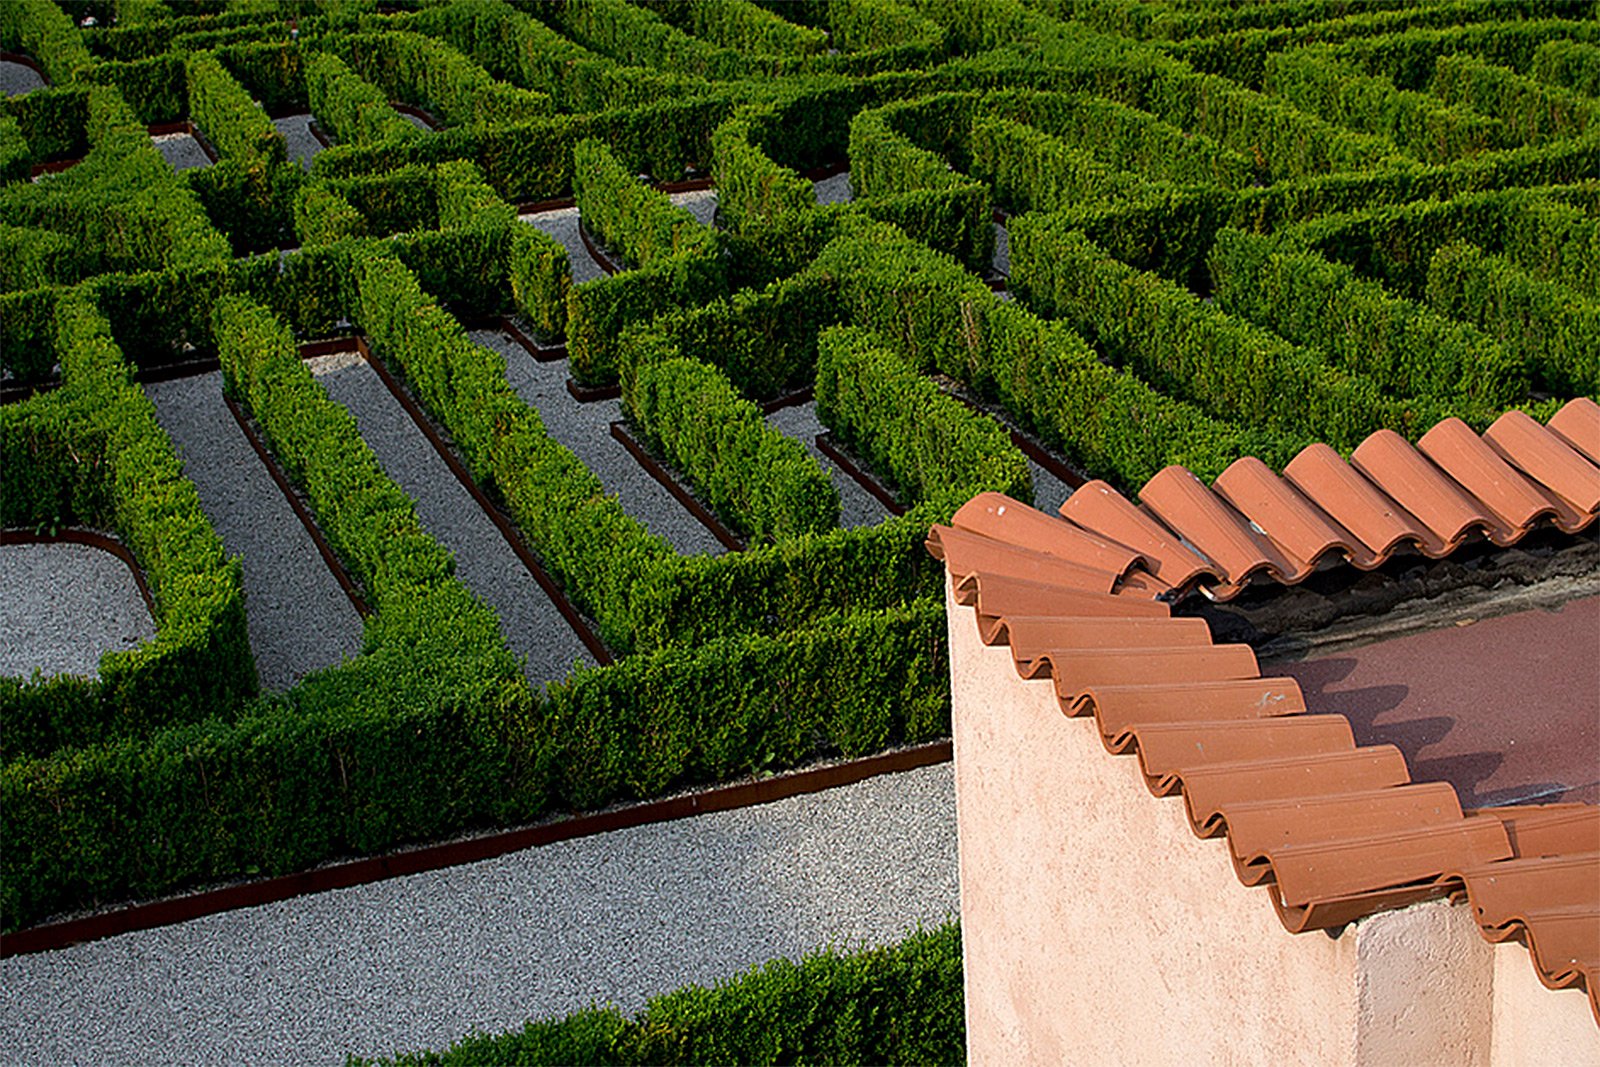 How to get out of the Borges Labyrinth in Venice